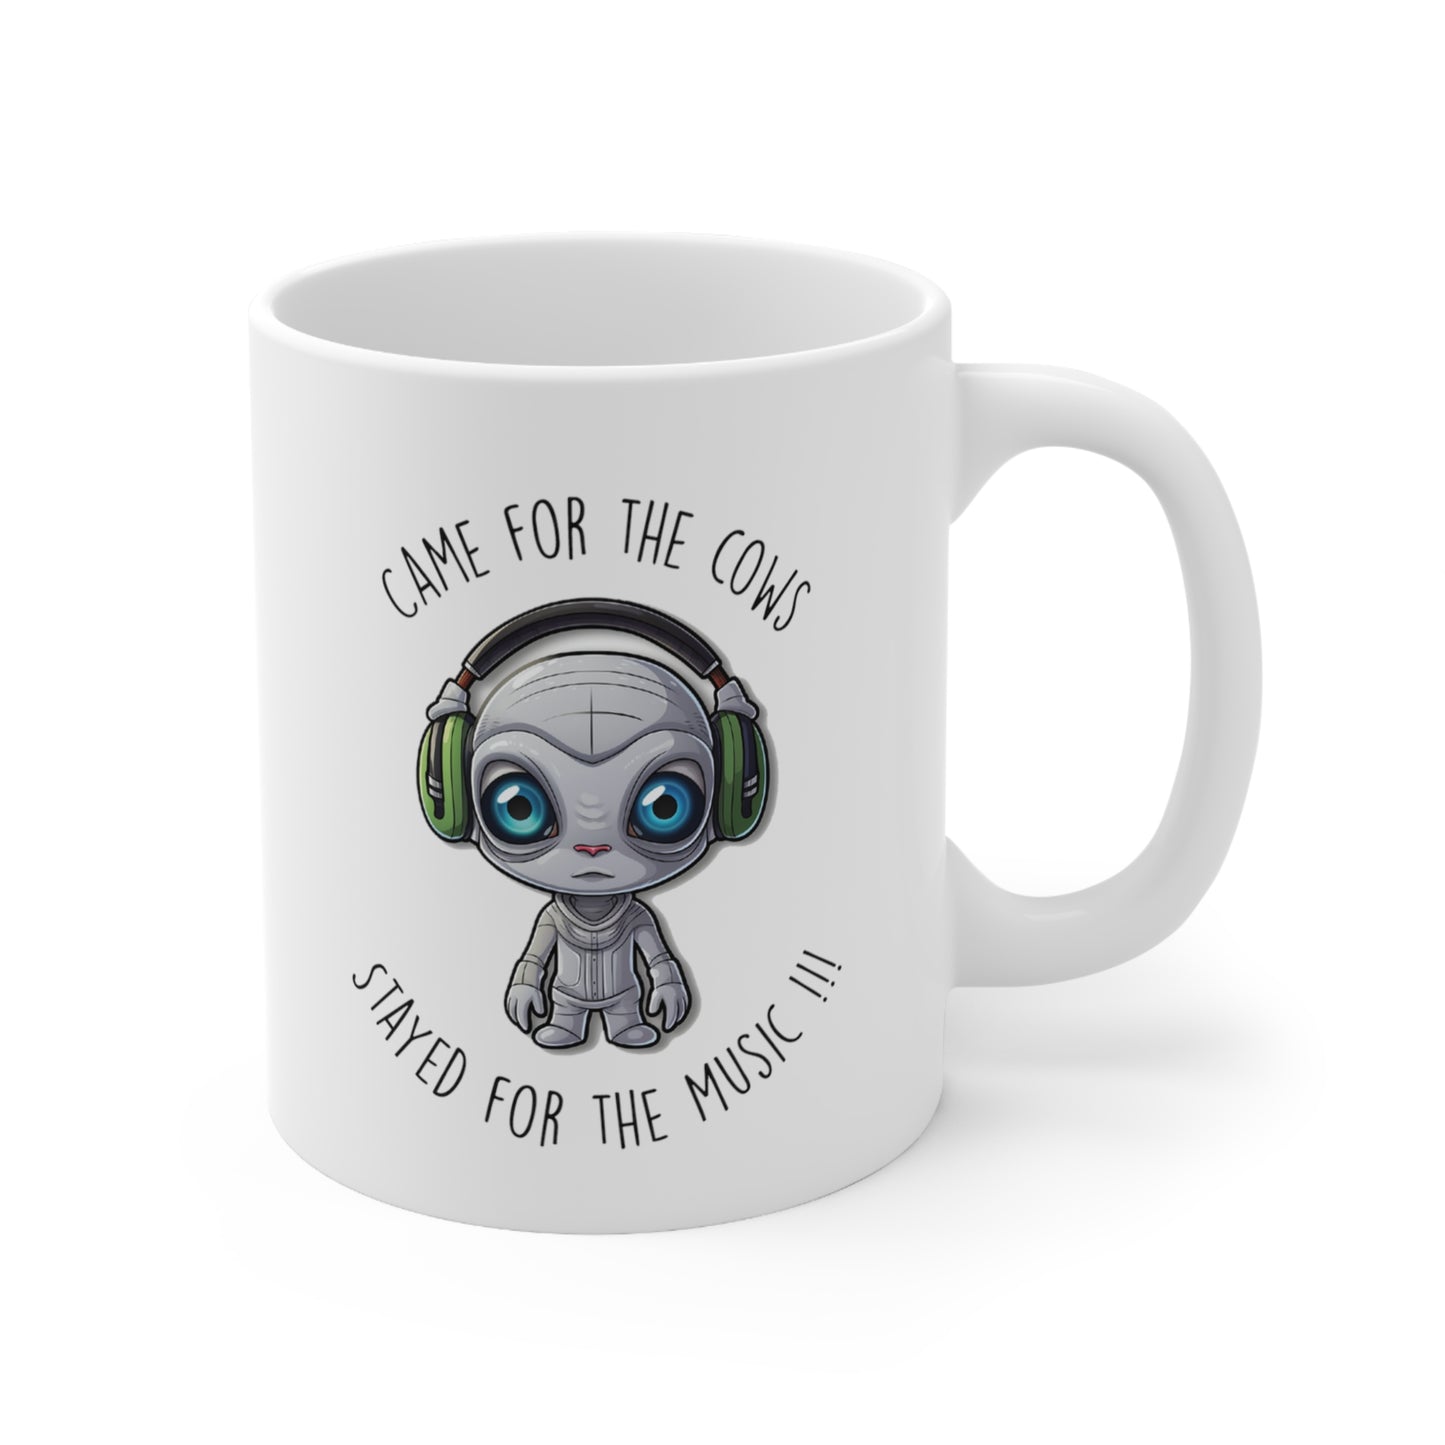 Little Alien Coffee Mug - "Came for the Cows, Stayed for the Music!!!" 11oz Coffee Mug